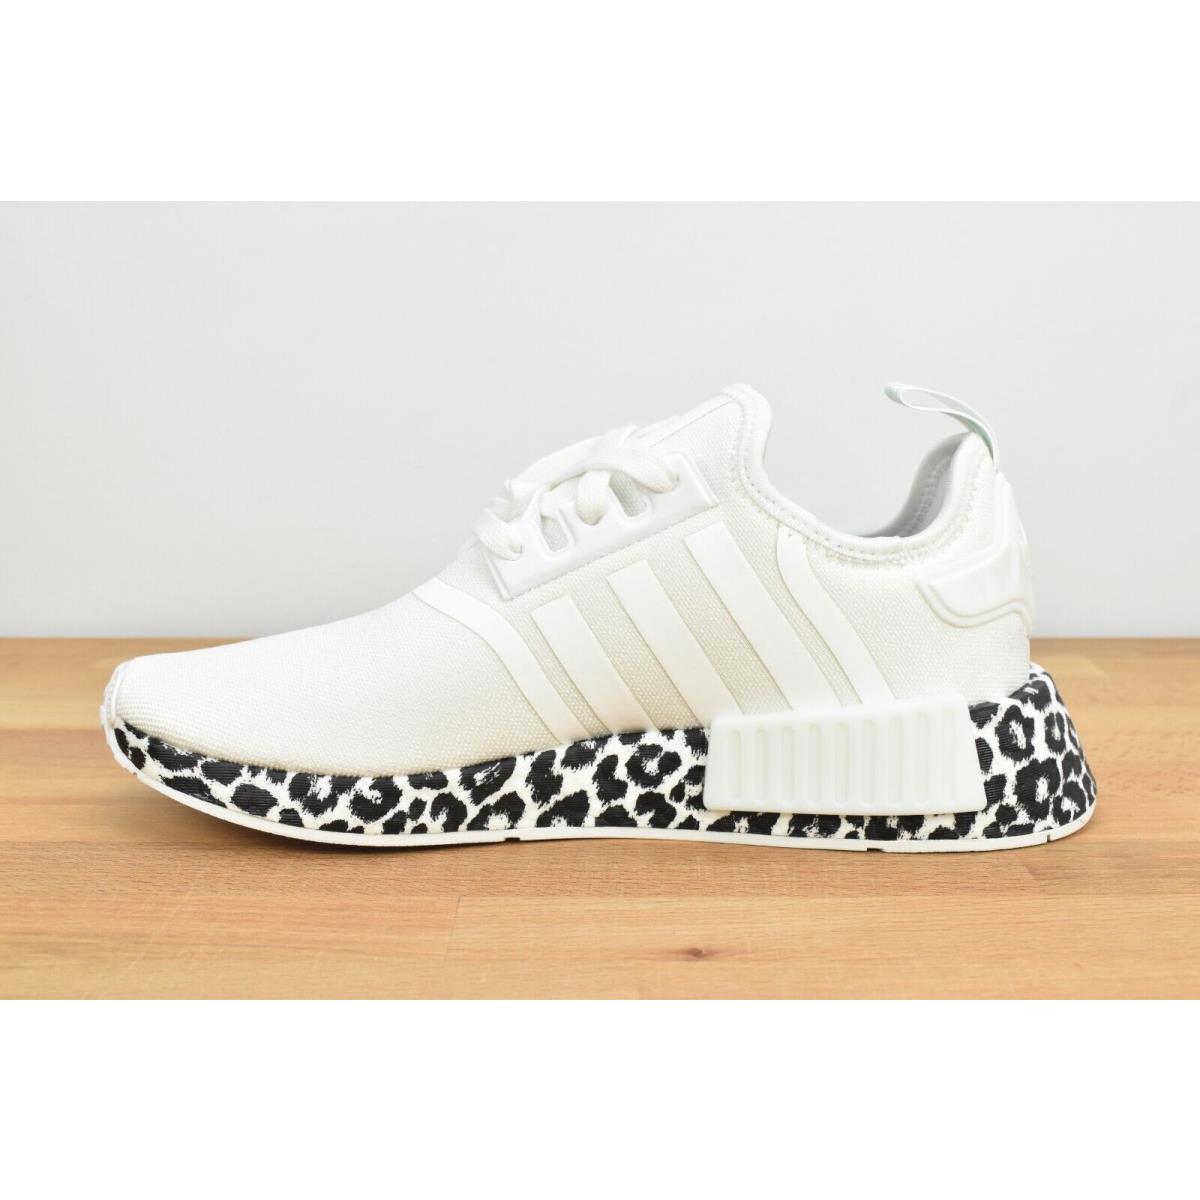 Adidas shoes NMD - White 0